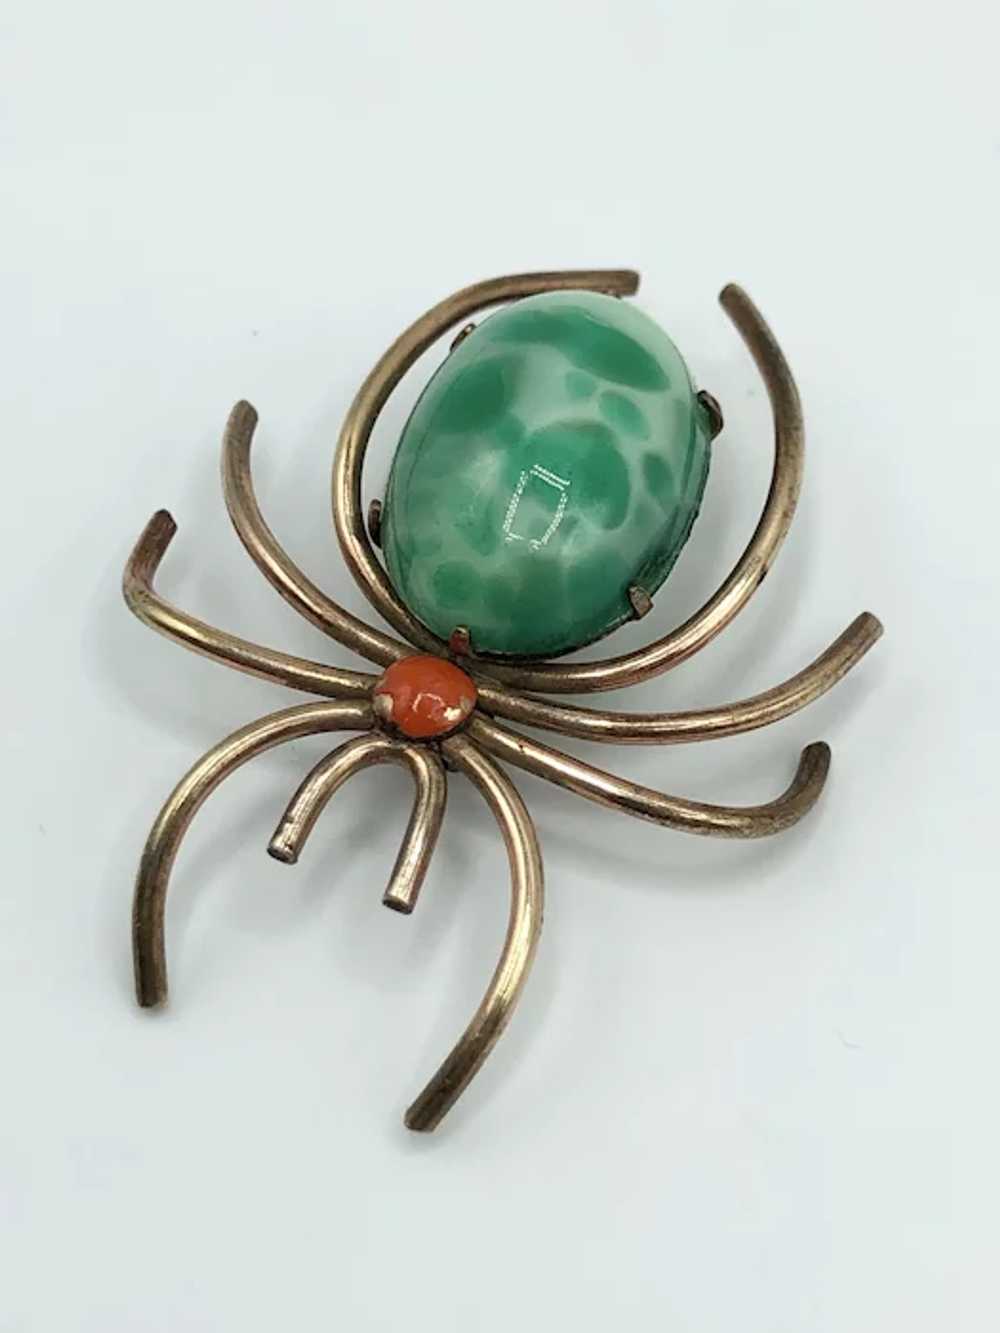 10k Gold Filled White Co Spider Brooch Pin - image 4